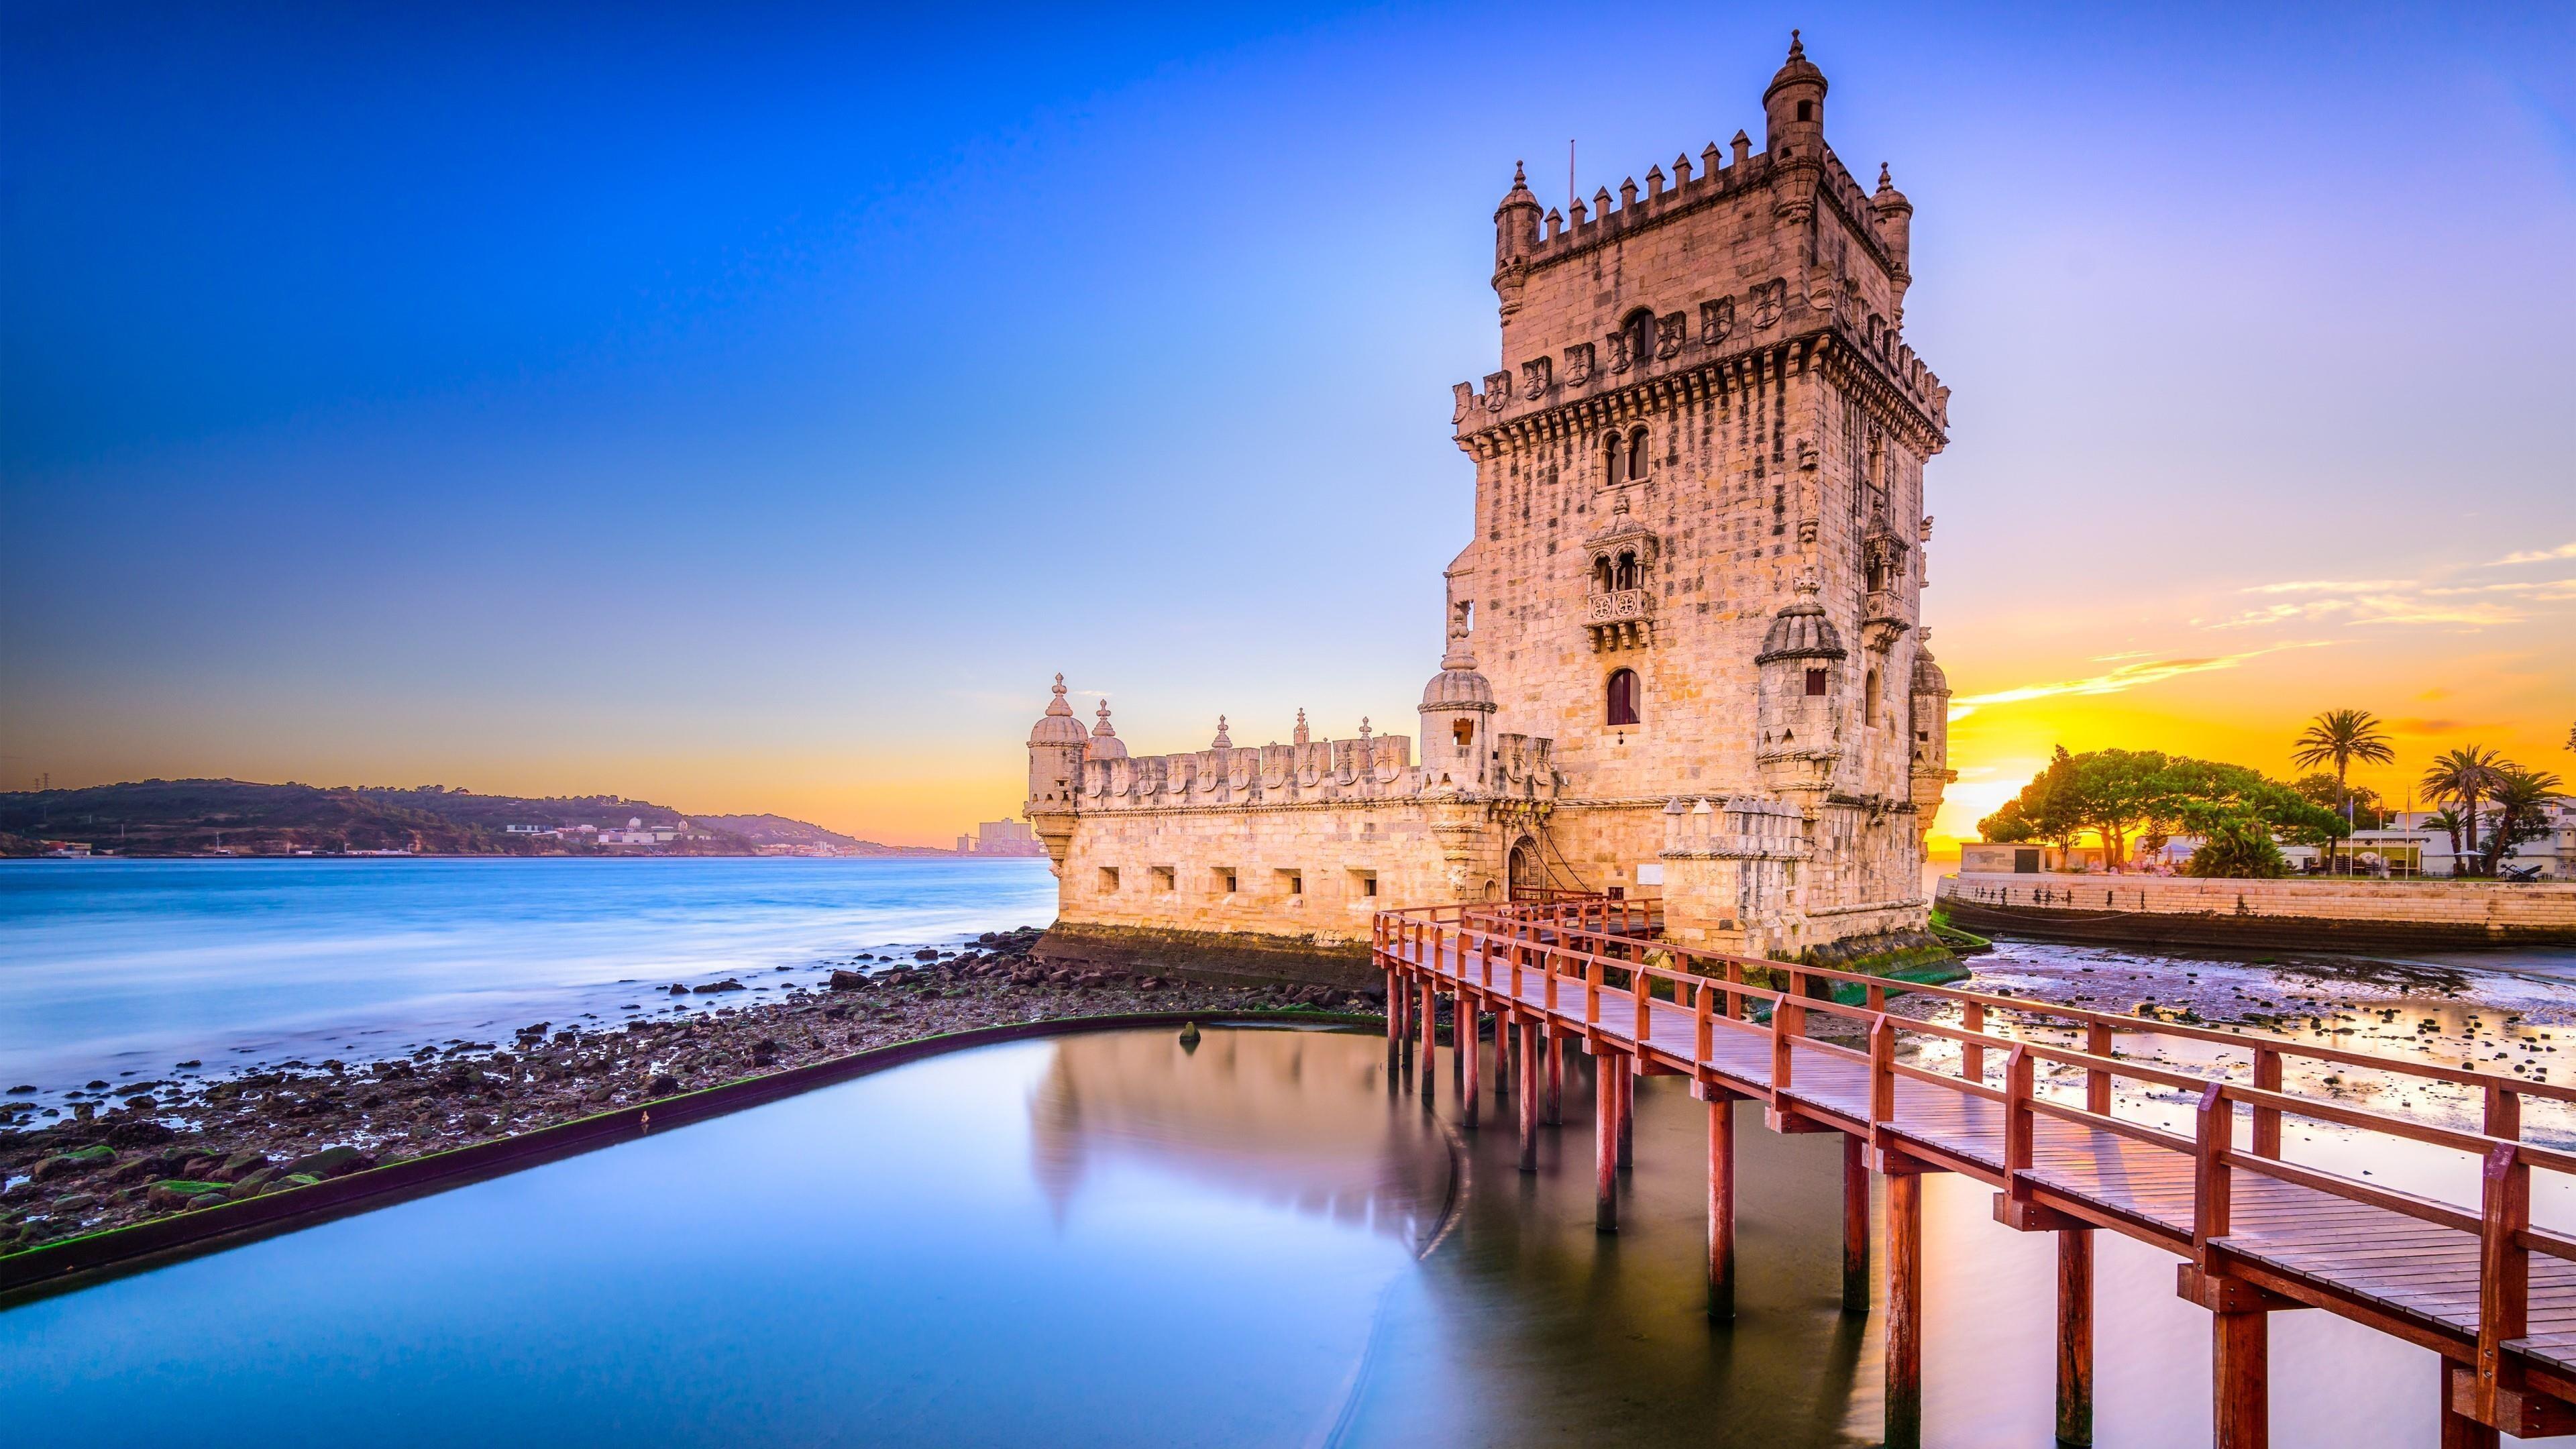 3840 x 2160 · jpeg - Belem Tower in Lisbon Tourist Attraction Portugal 4K Wallpapers | HD ...